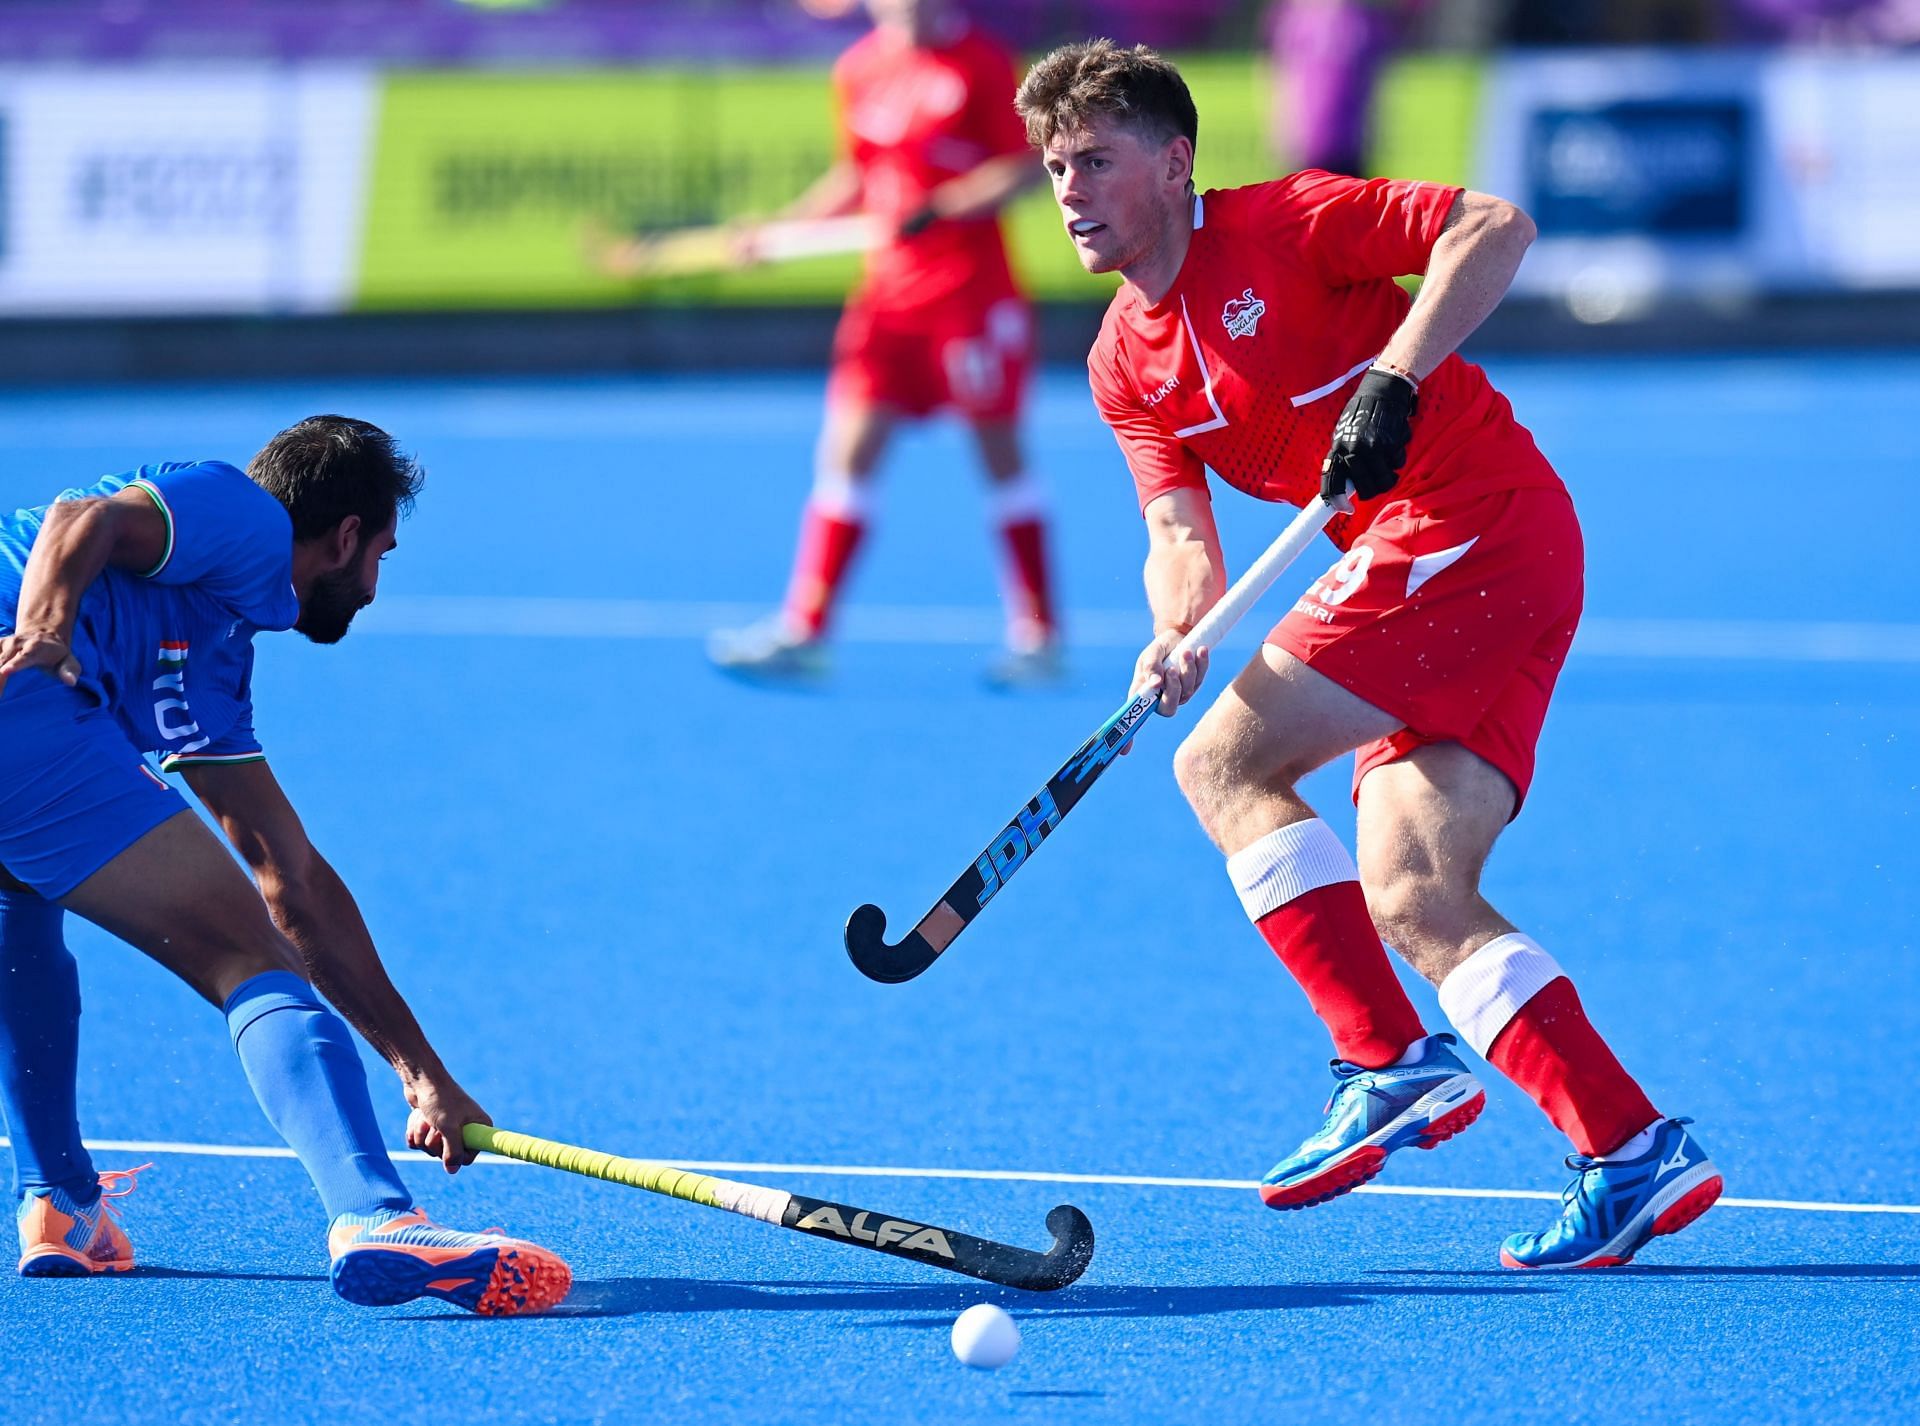 Action during the India vs England match at CWG 2022. (PC: Hockey India)